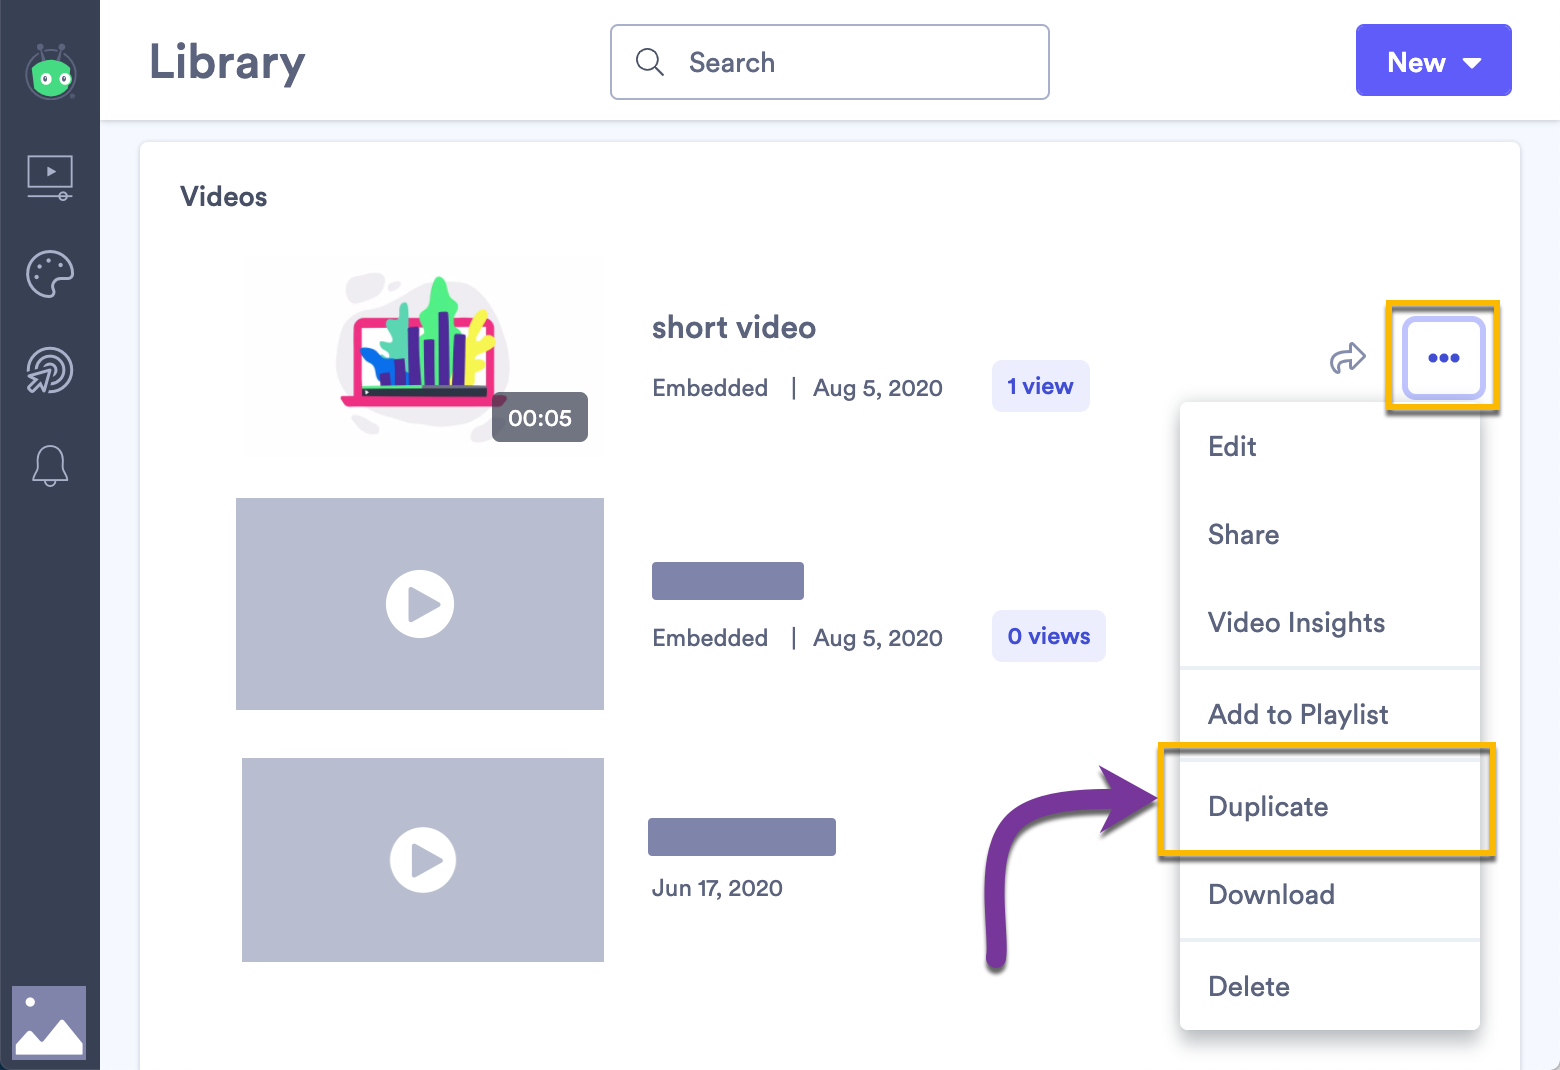 Duplicating a video in your library